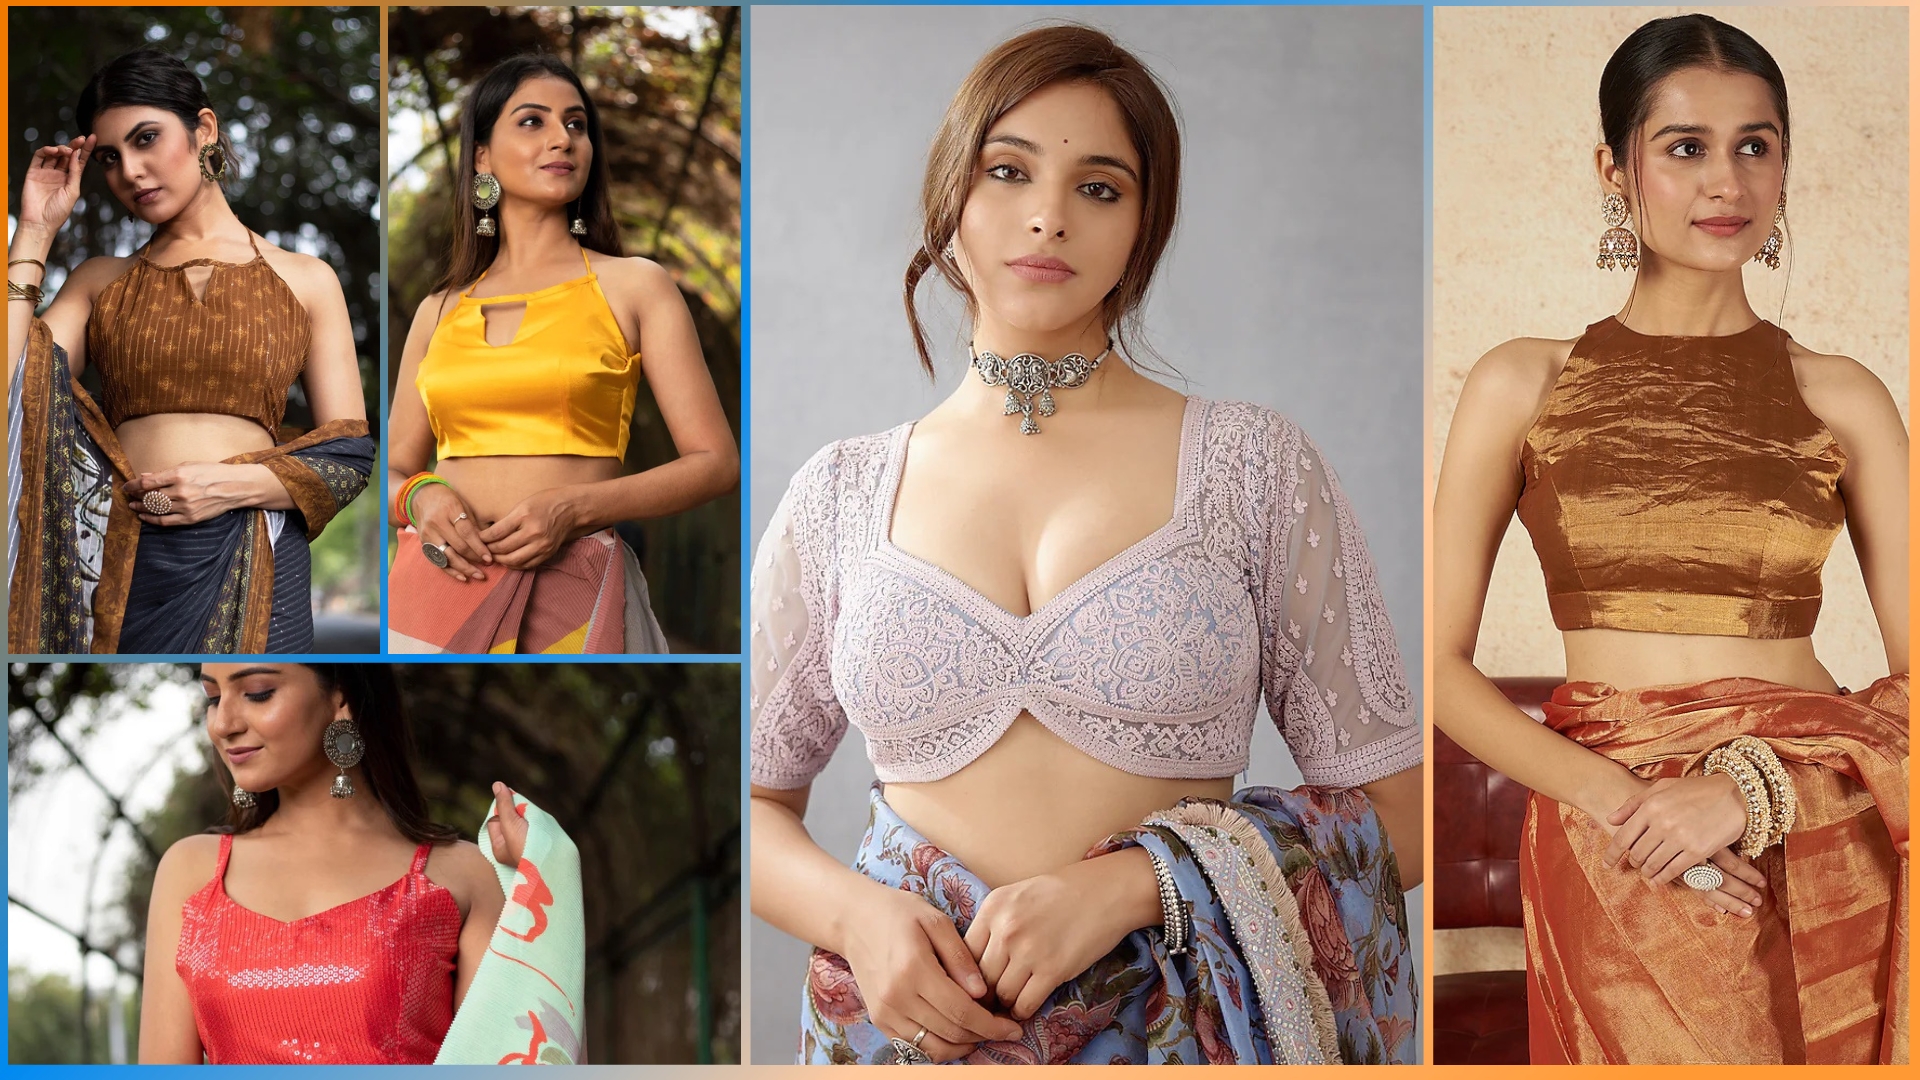 Backless Blouses Photos  Images of Backless Blouses - Times of India